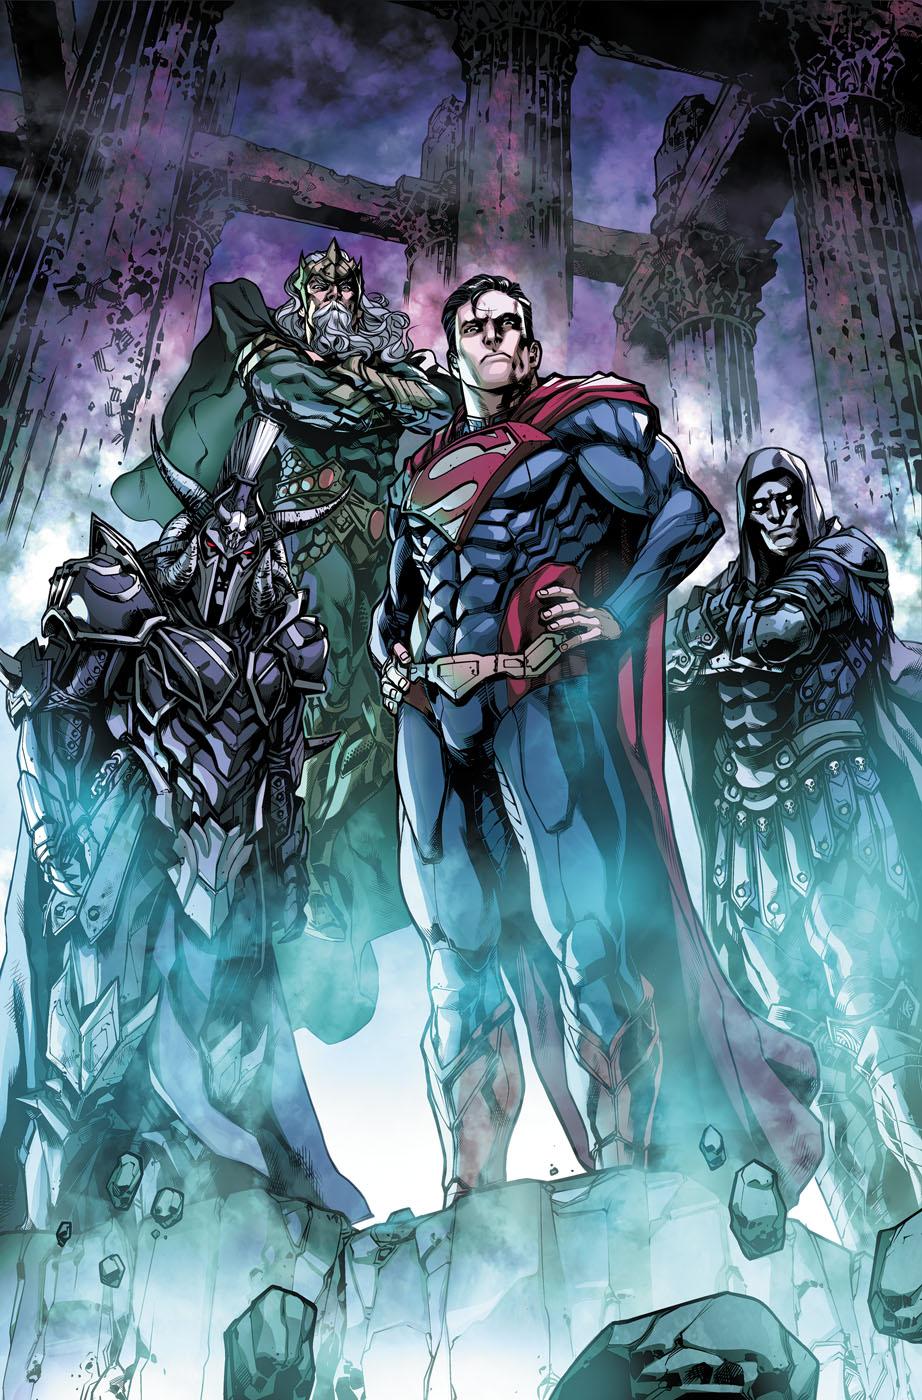 Injustice: Gods Among Us: Year Four Vol. 1 #8